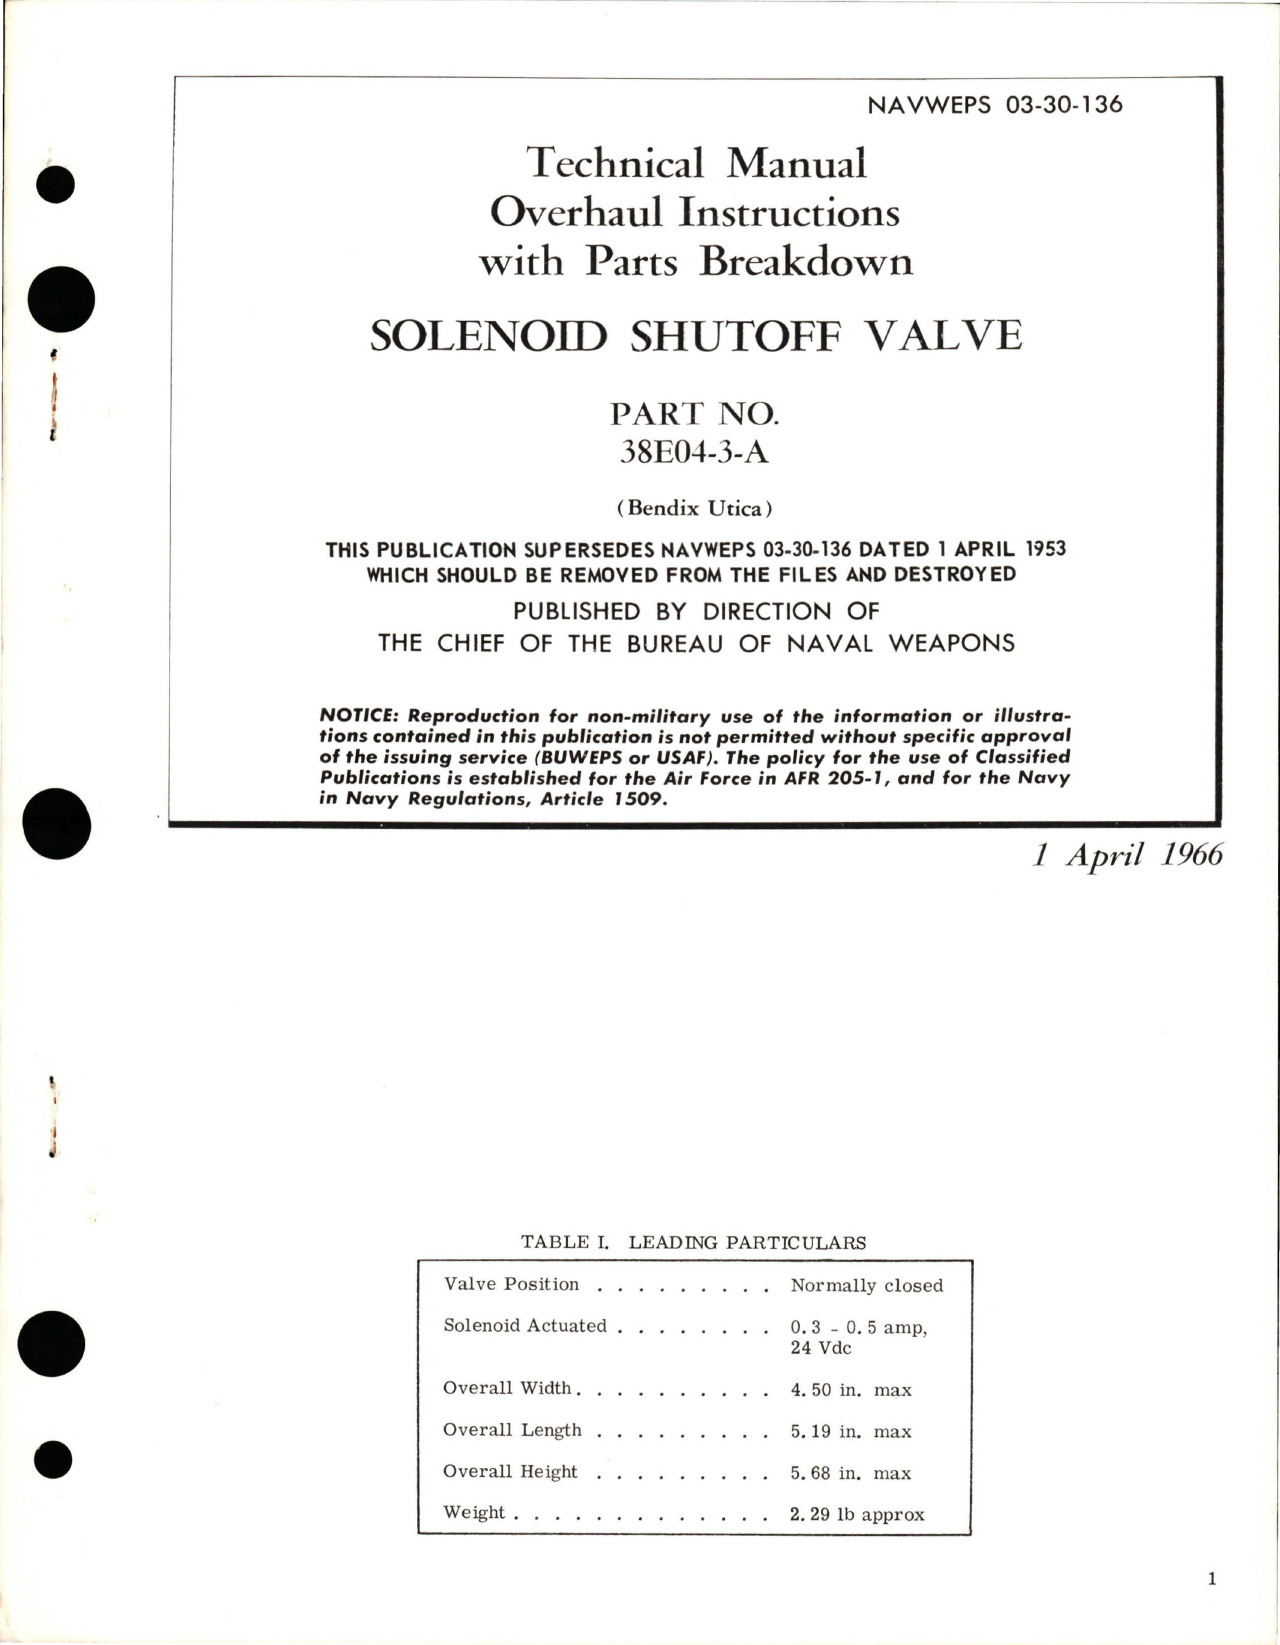 Sample page 1 from AirCorps Library document: Overhaul Instructions with Parts Breakdown for Solenoid Shutoff Valve - Part 38E04-3-A